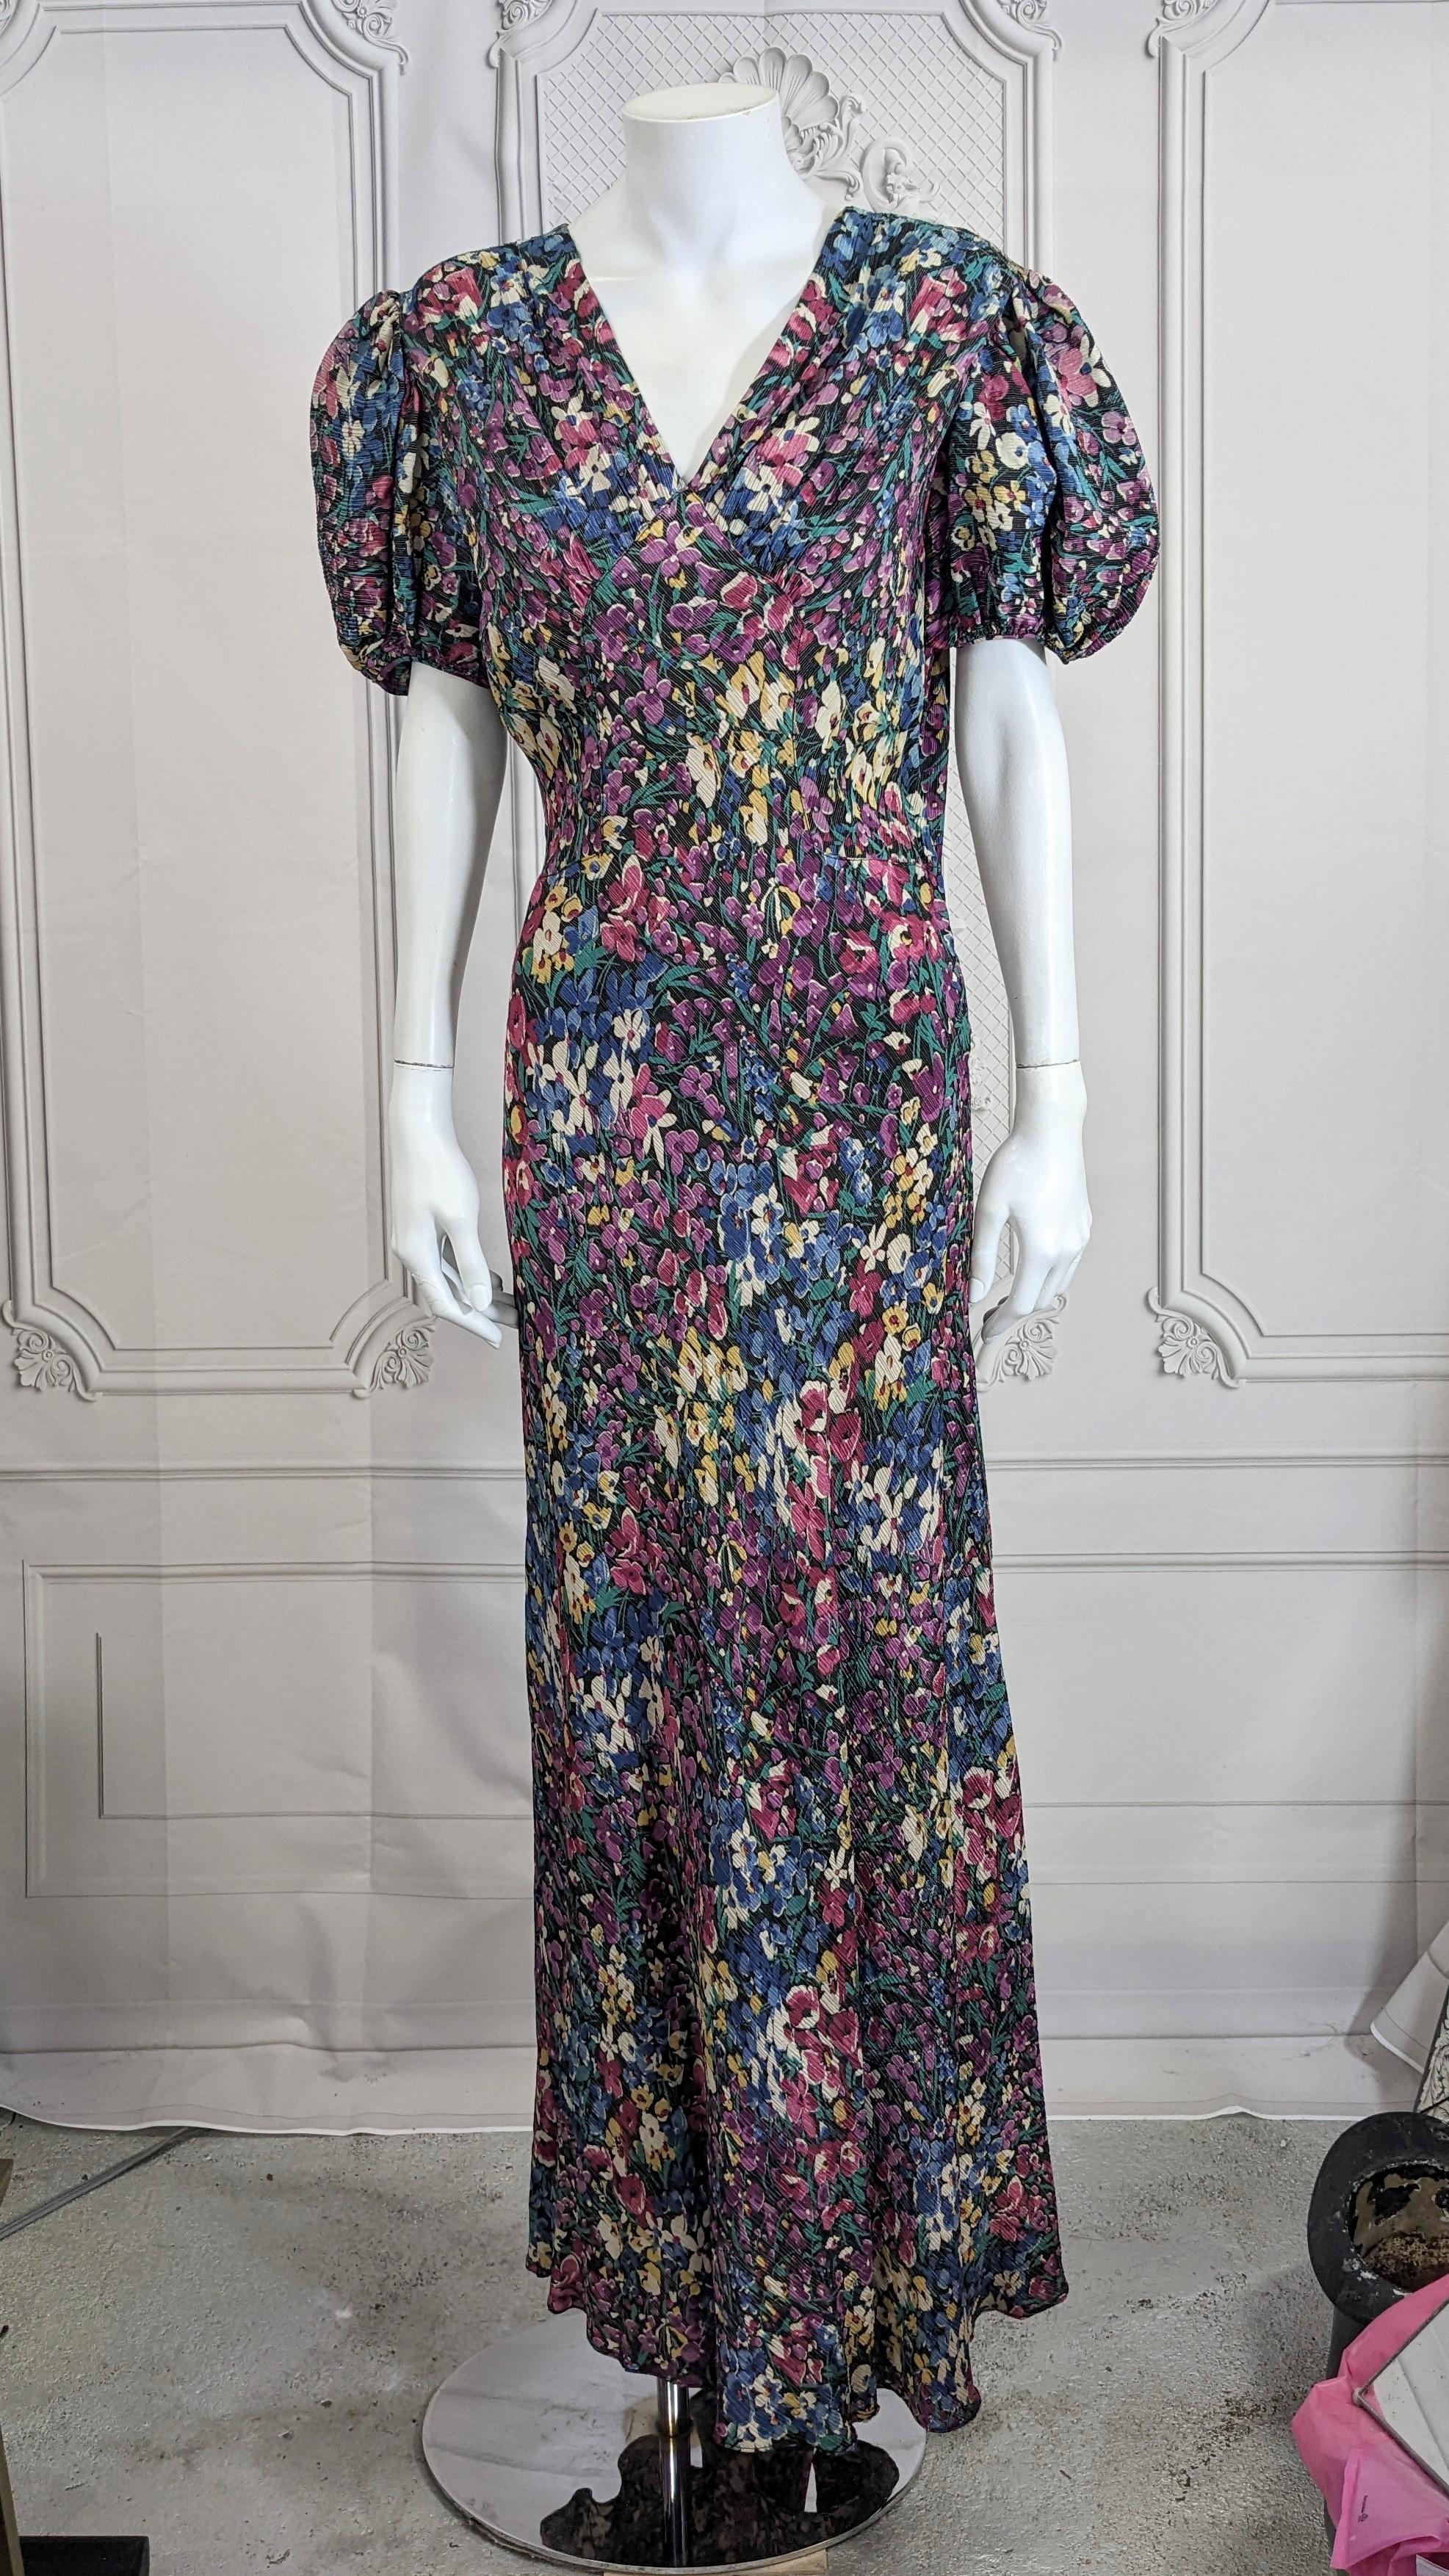 Elegant Art Deco Lame Floral Gown from the 1930's. Bias cut with very large puffed sleeves, slim cut bodice with lovely flared skirt. Gathers fall from shoulders to central yoke. Side snaps closure entry as well as 2 sets of back button closures.